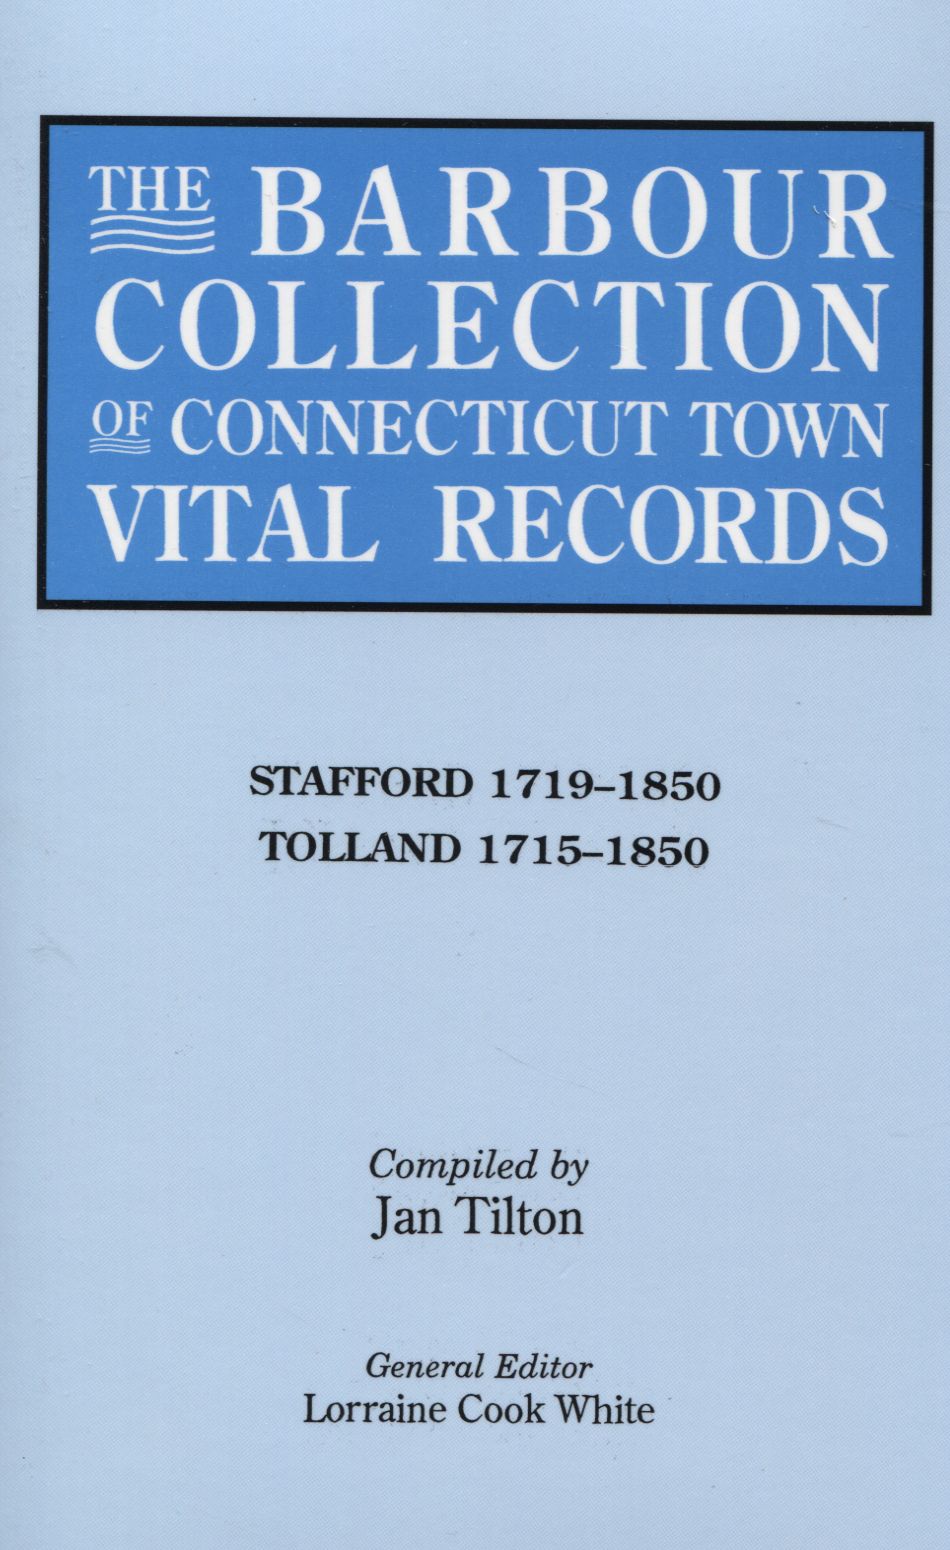 The Barbour Collection of Connecticut Town Vital Records [Vol. 44]